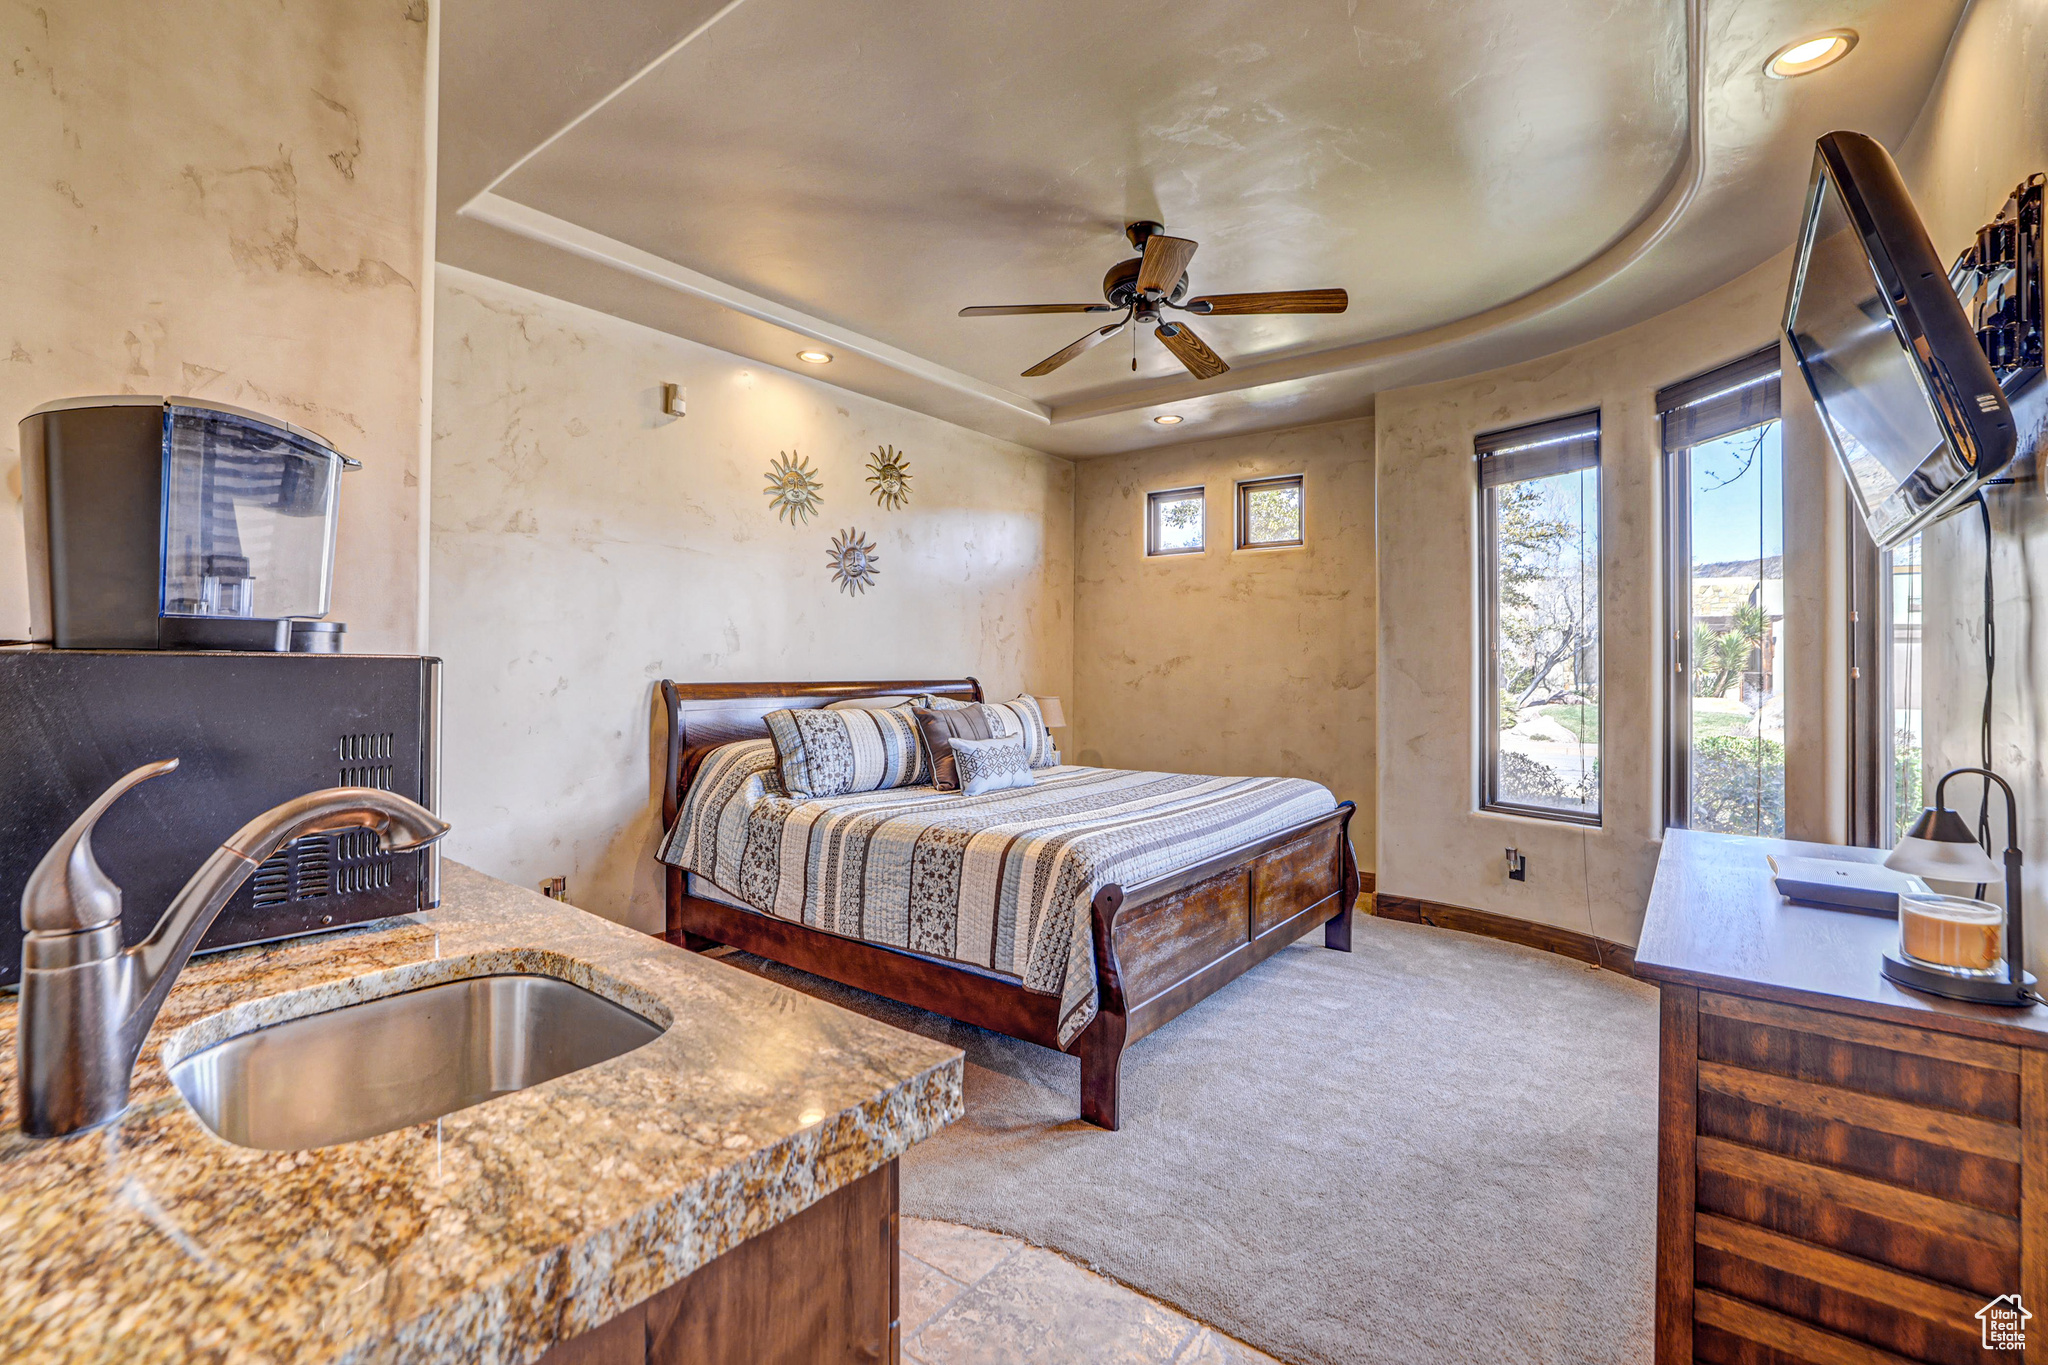 Tiled bedroom with sink, a raised ceiling, and ceiling fan